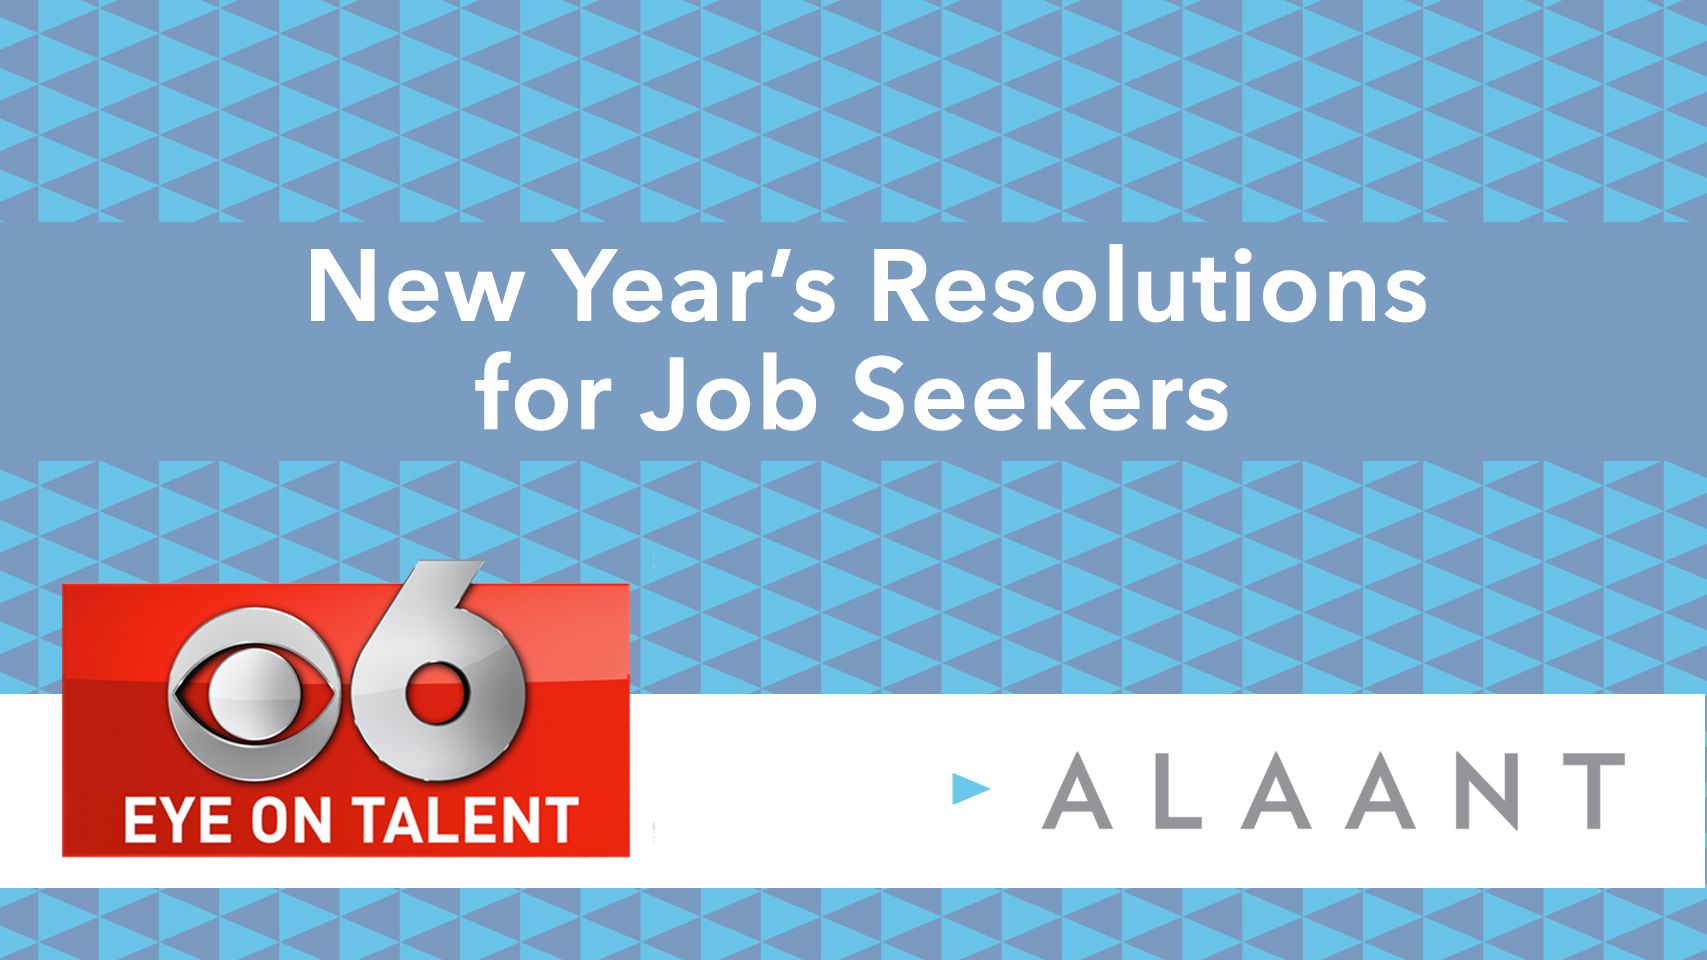 Alaant Eye on Talent New Year’s Resolutions for Job Seekers